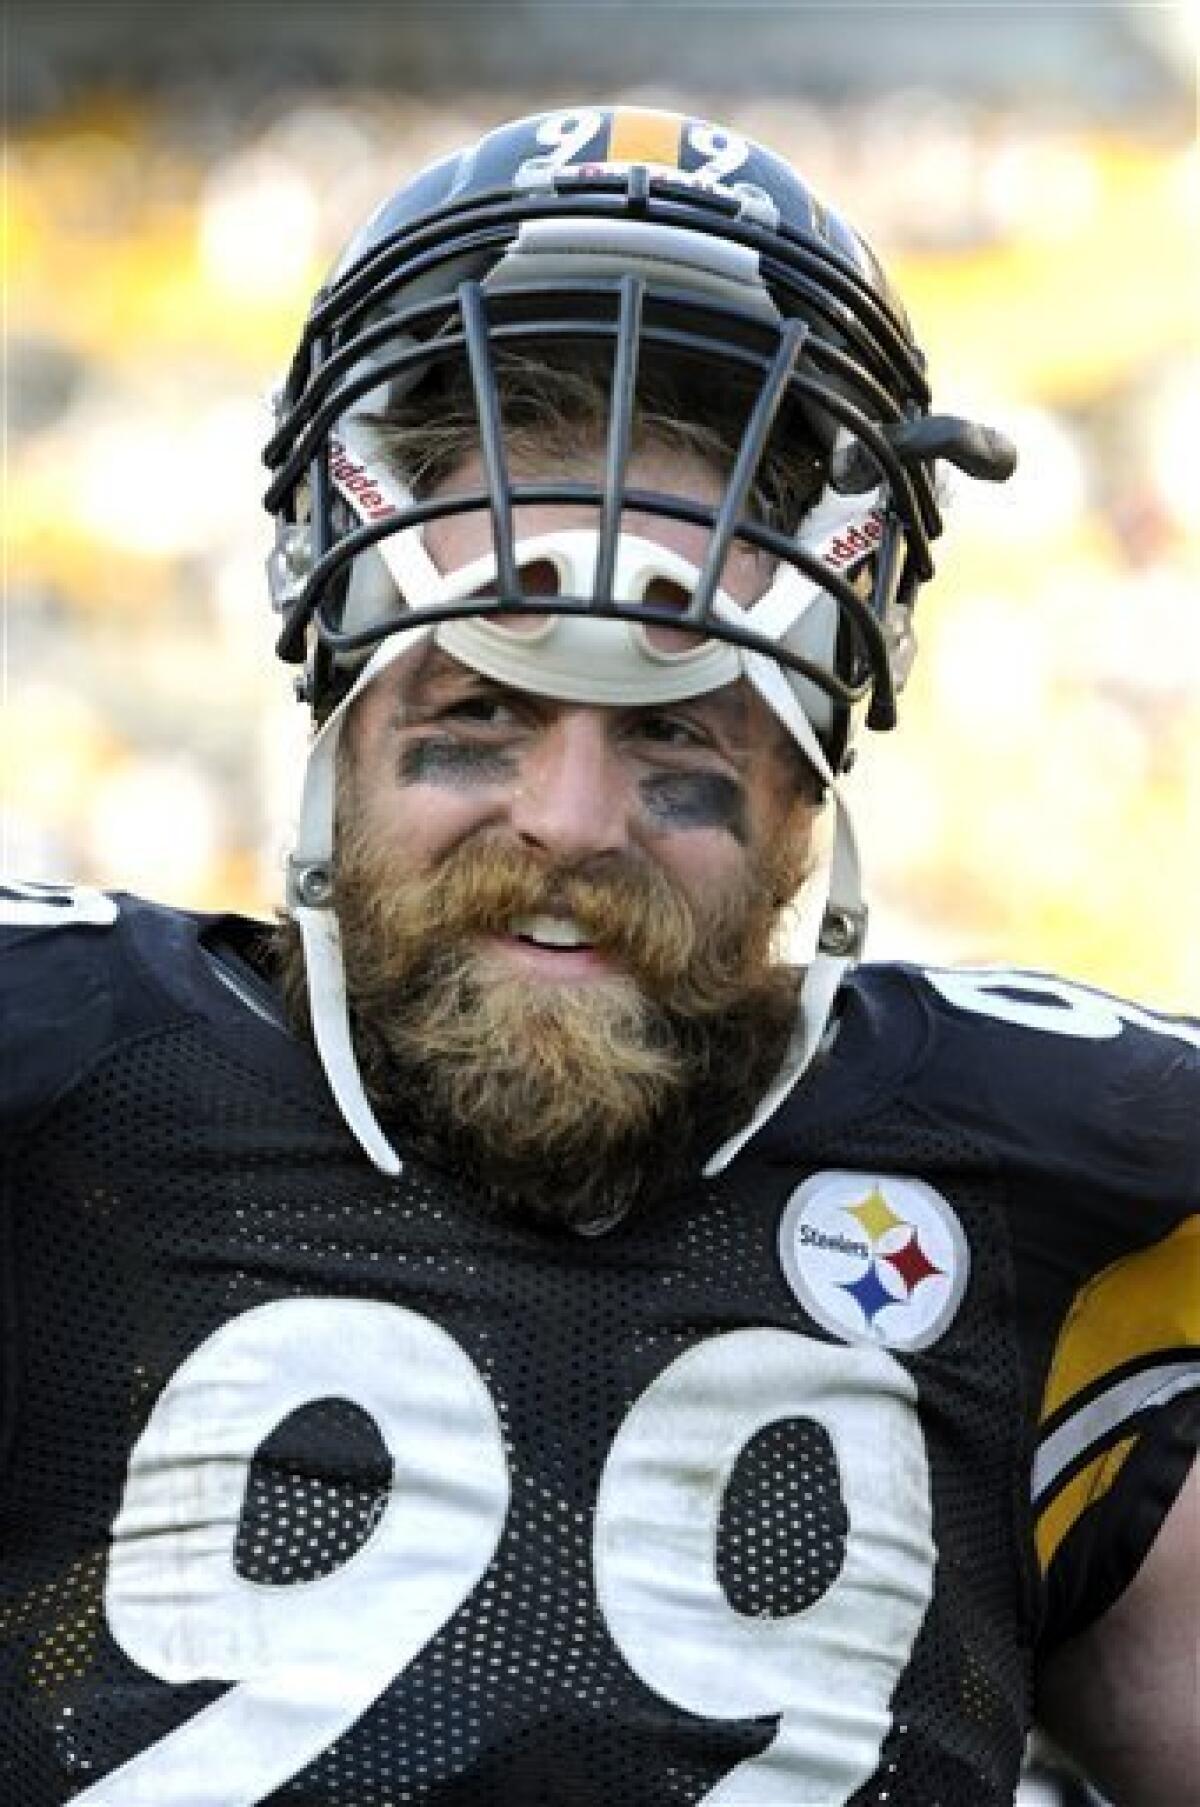 Keisel's play gaining notice for Steelers - The San Diego Union-Tribune